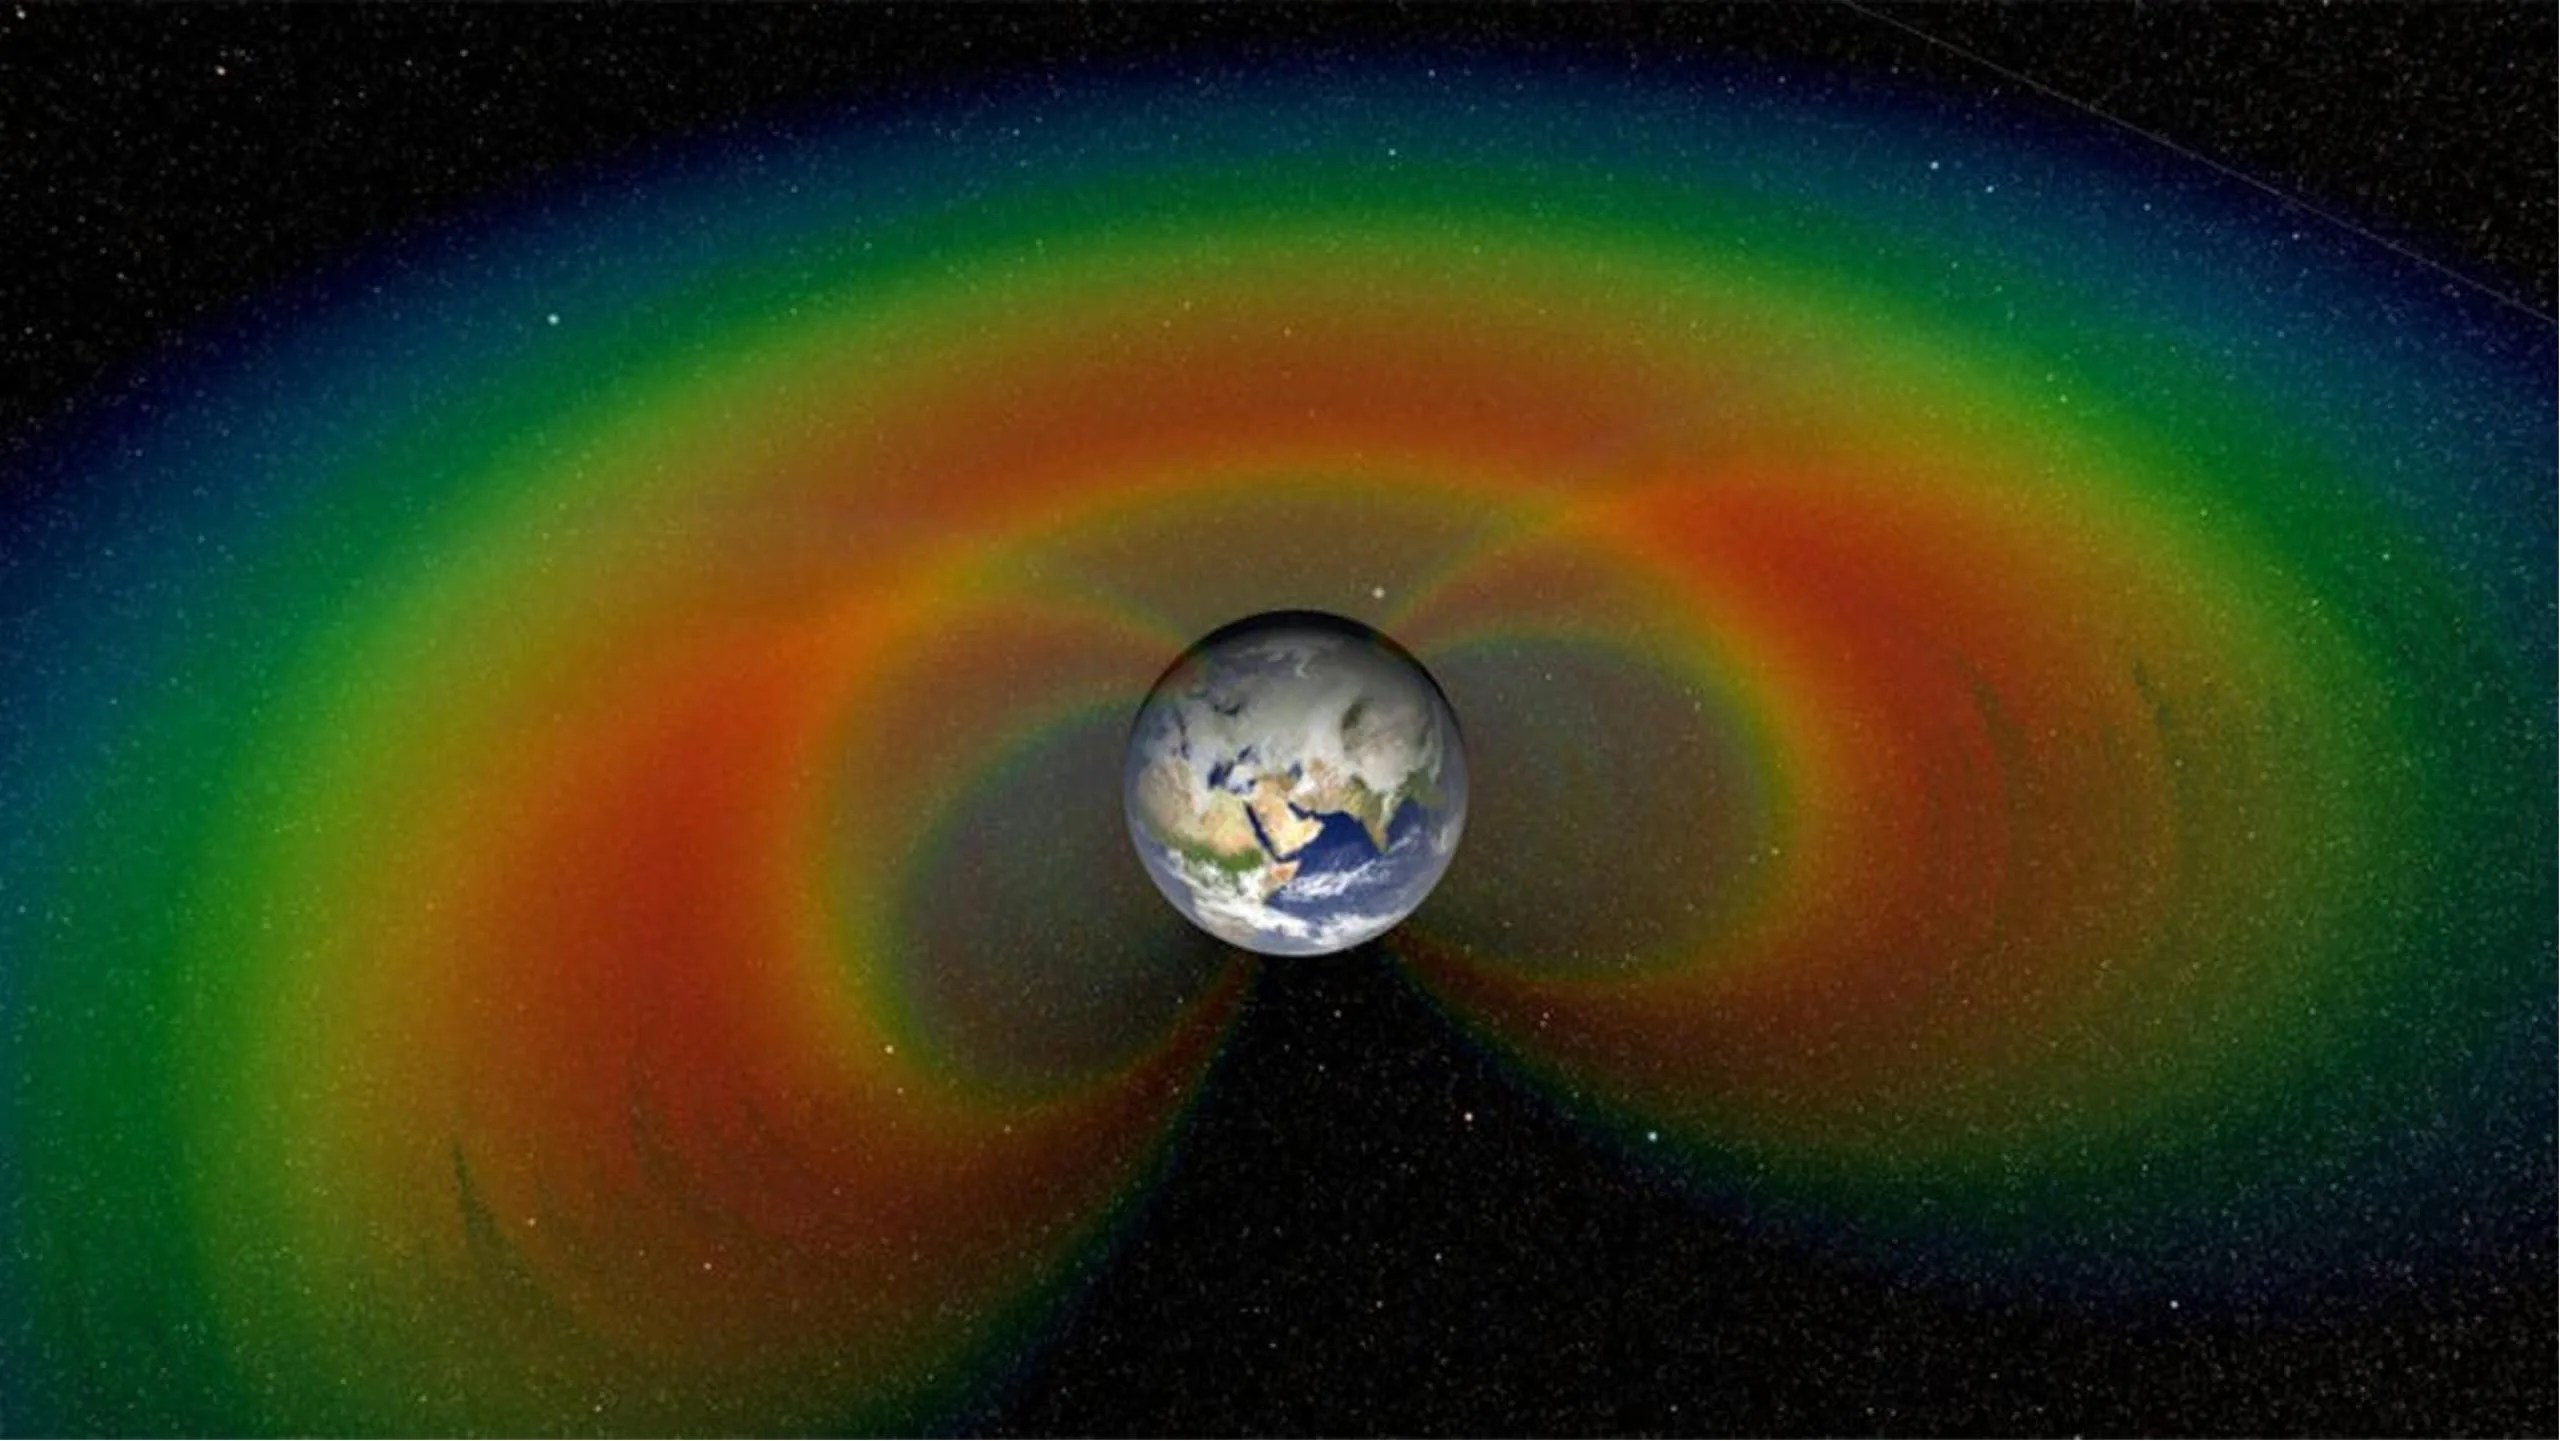 The Earth is centered against a starry universe. Several rainbow-colored bands surround the Earth in oblong and spherical shapes.